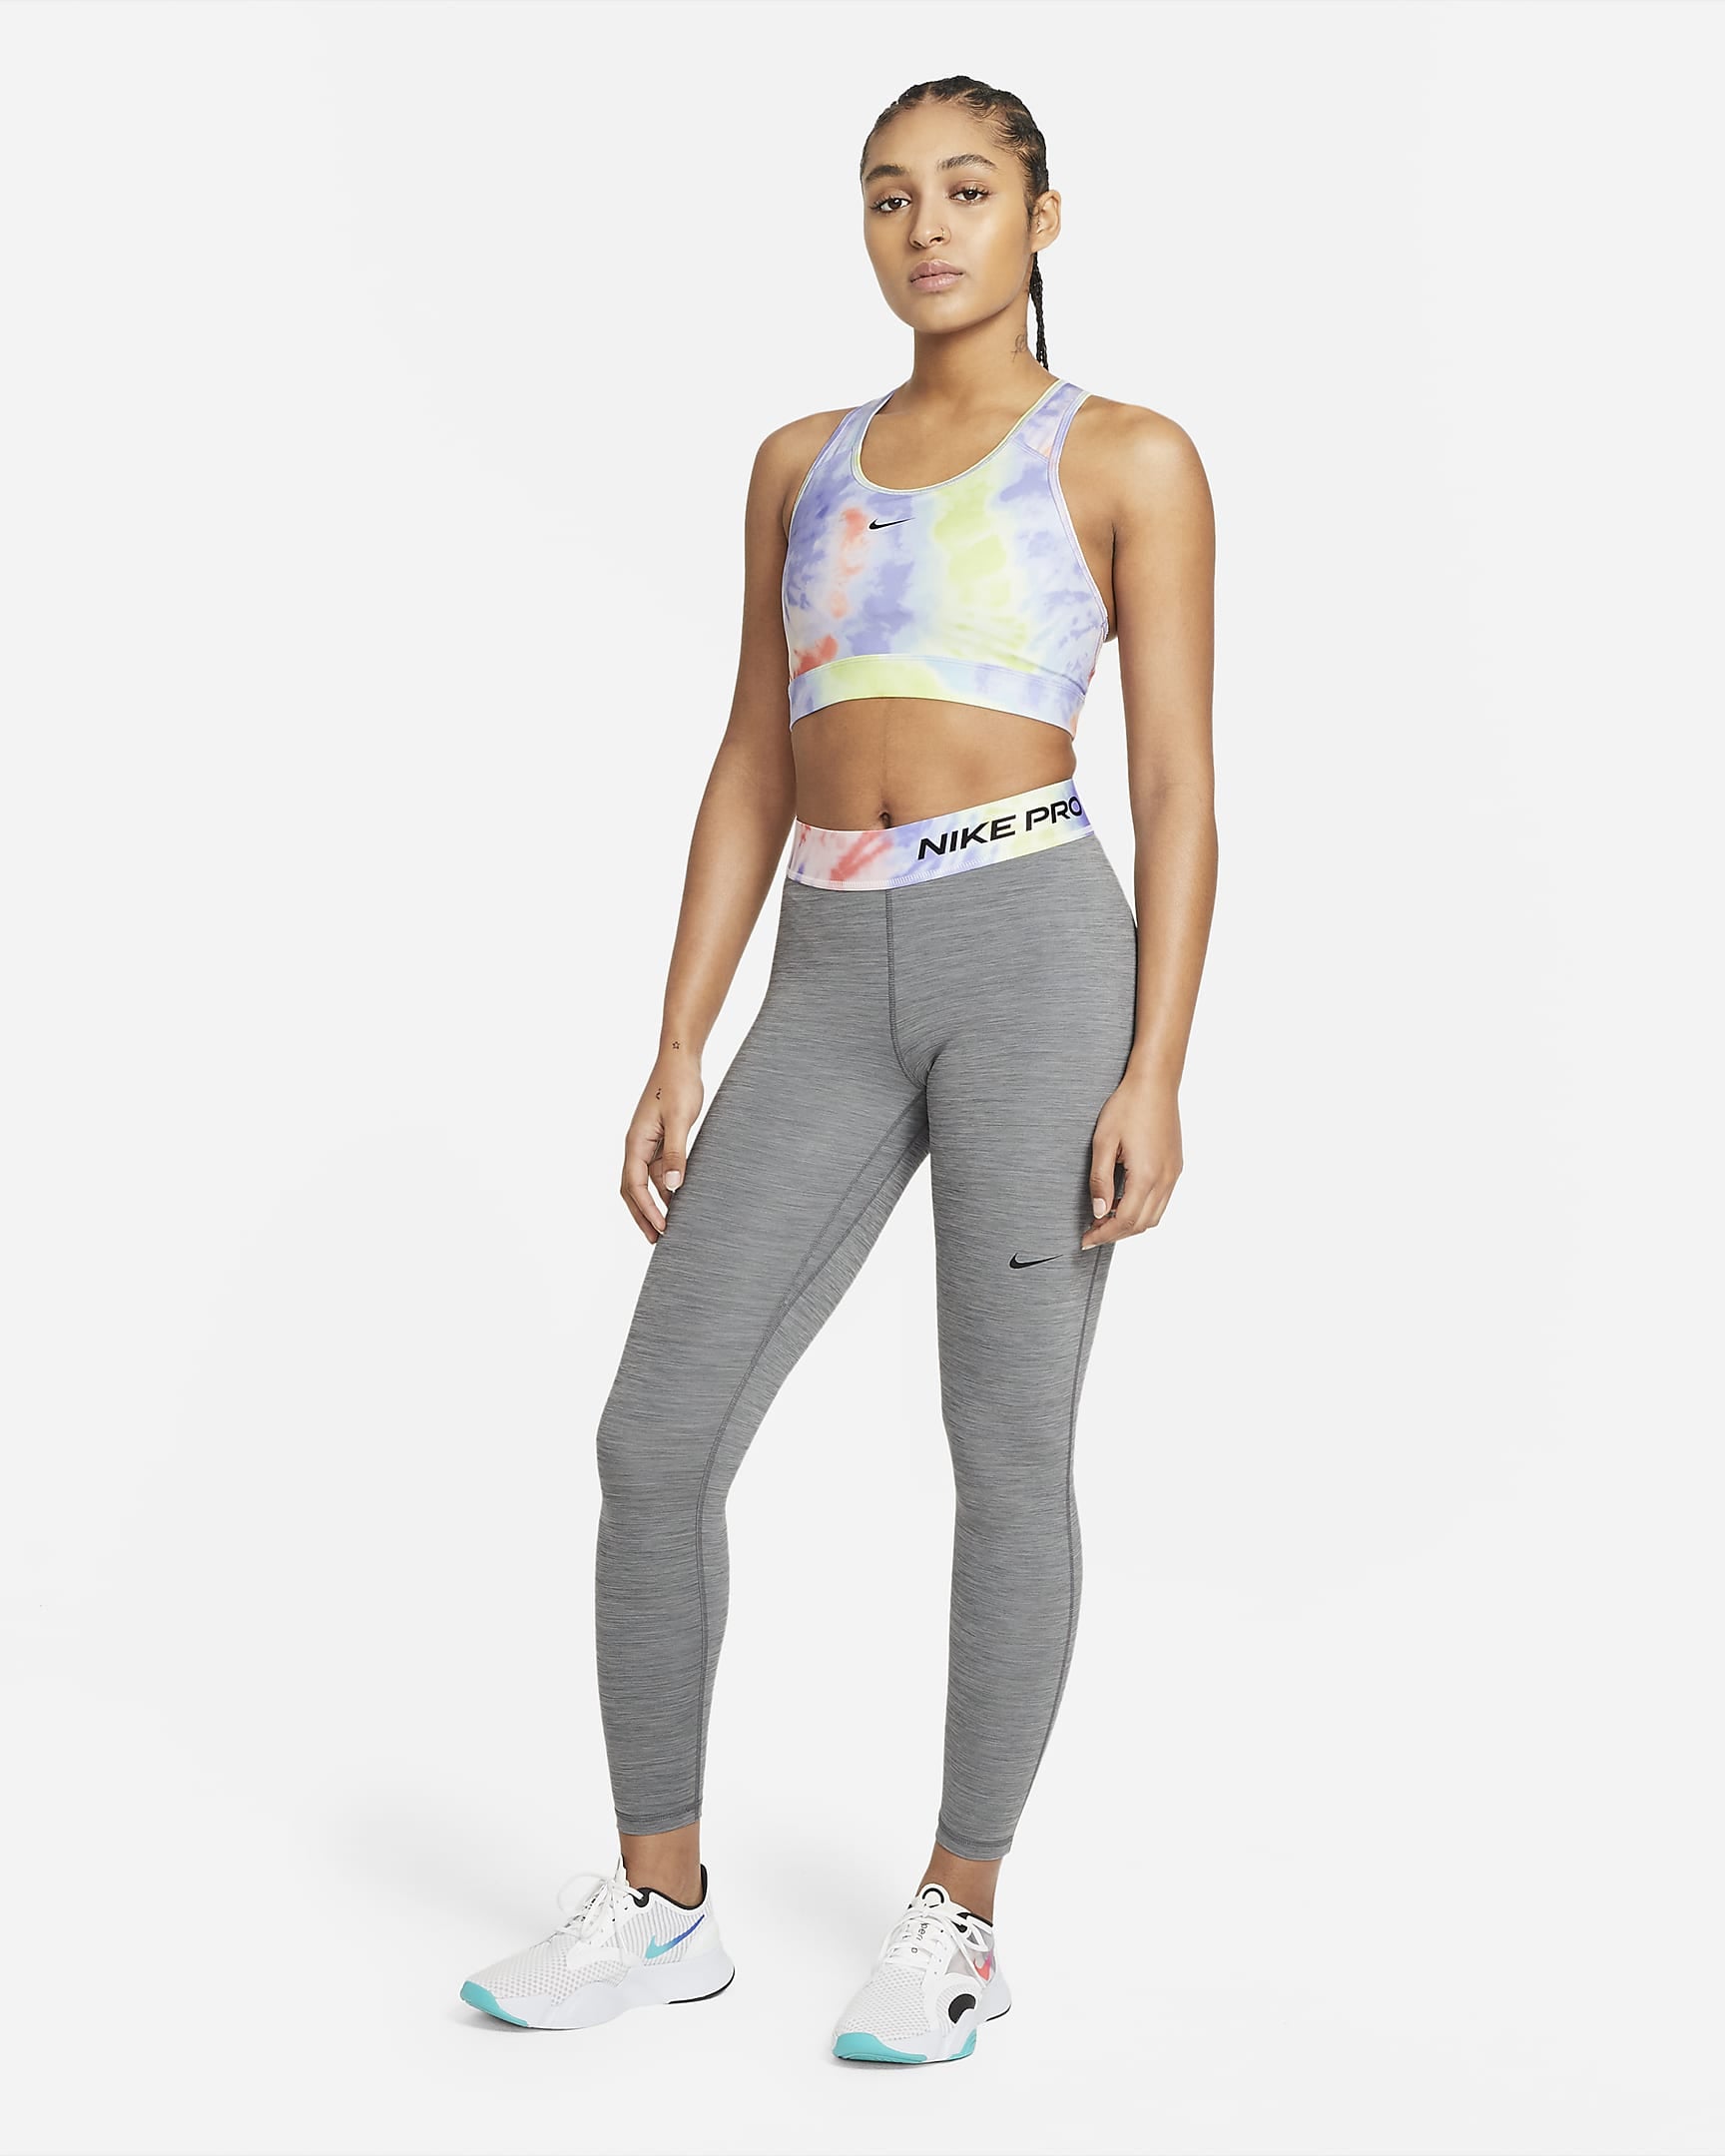 Best New Nike Clothes For Women, Spring 2021